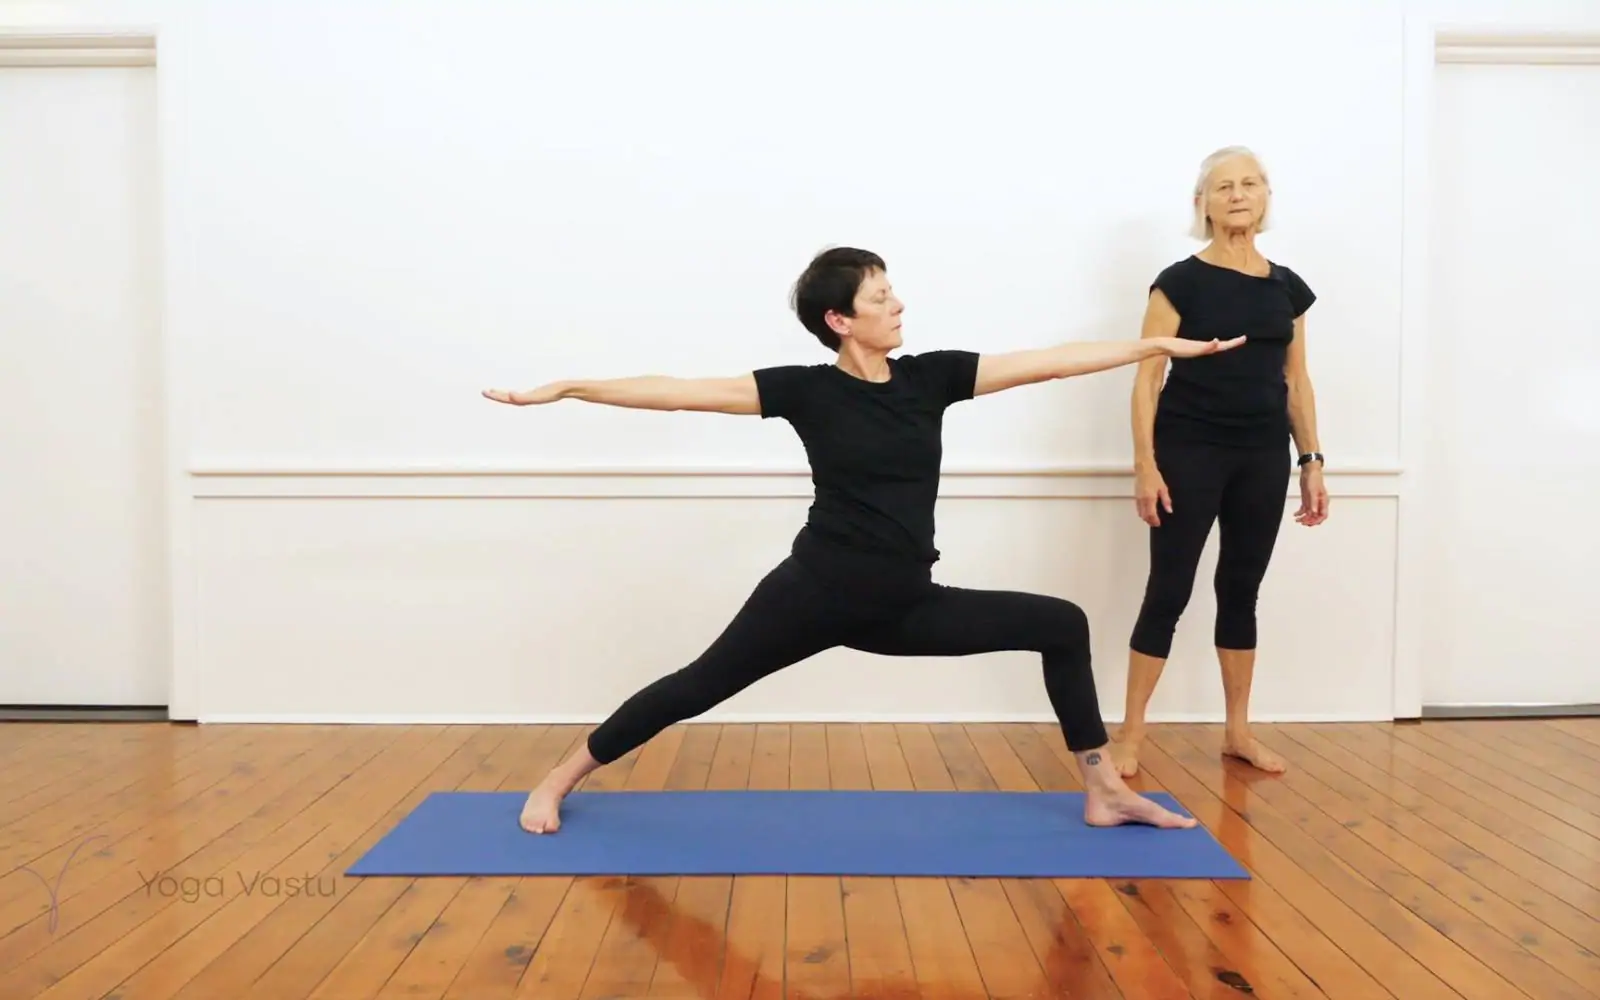 The Warrior 2 yoga pose is a great way to open your hips and strengthen  your core muscles. Here's what you need to know to make the most from this  powerful pose…